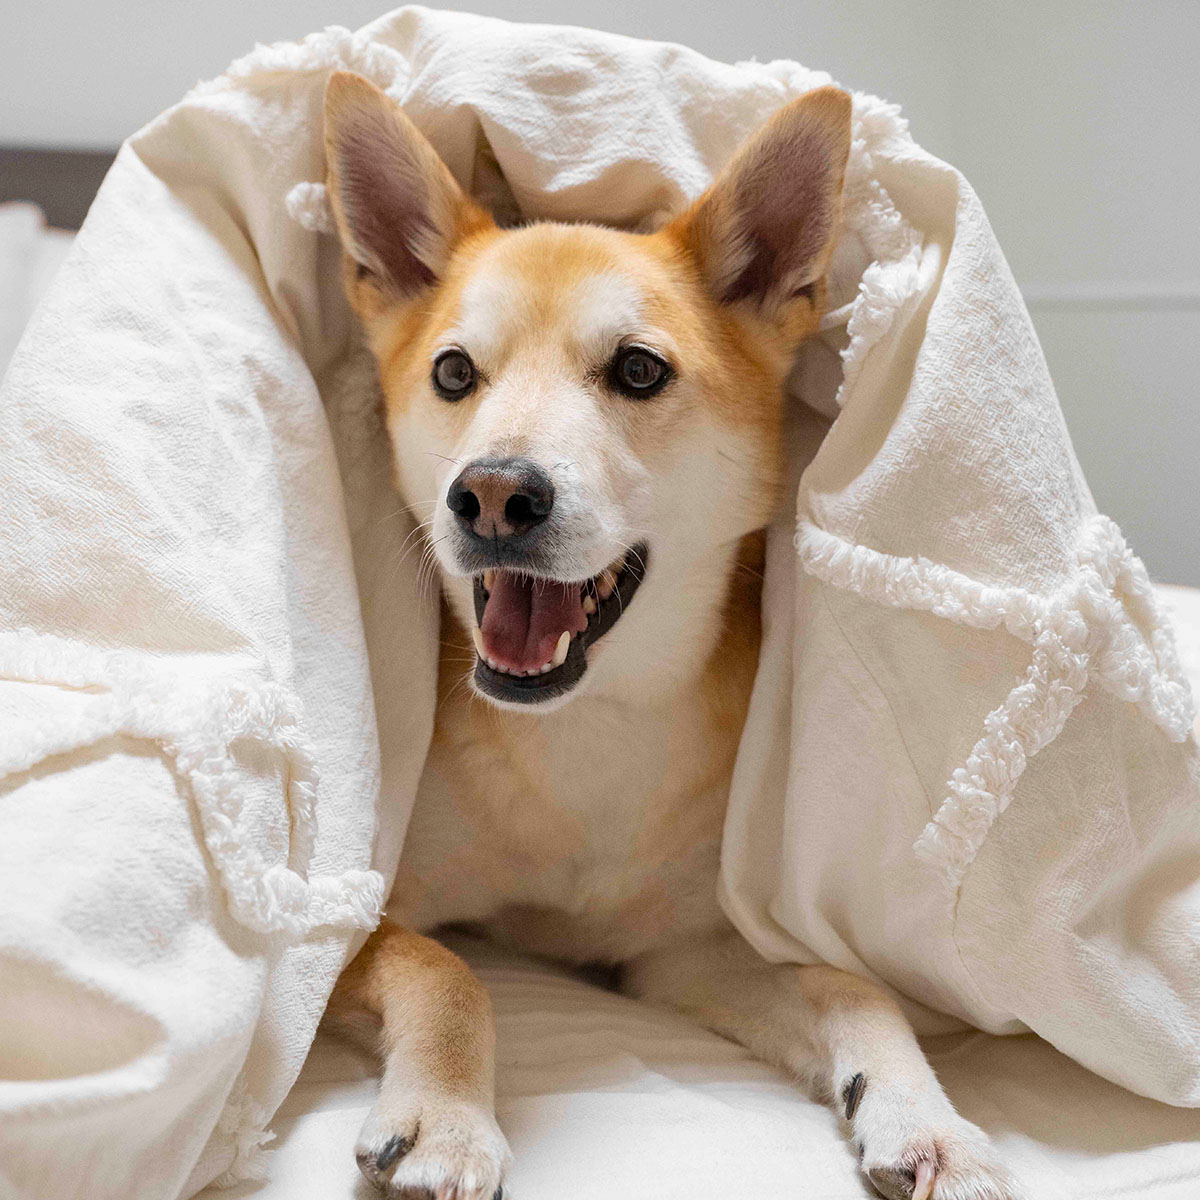 a dog lying on a bed under a blanket